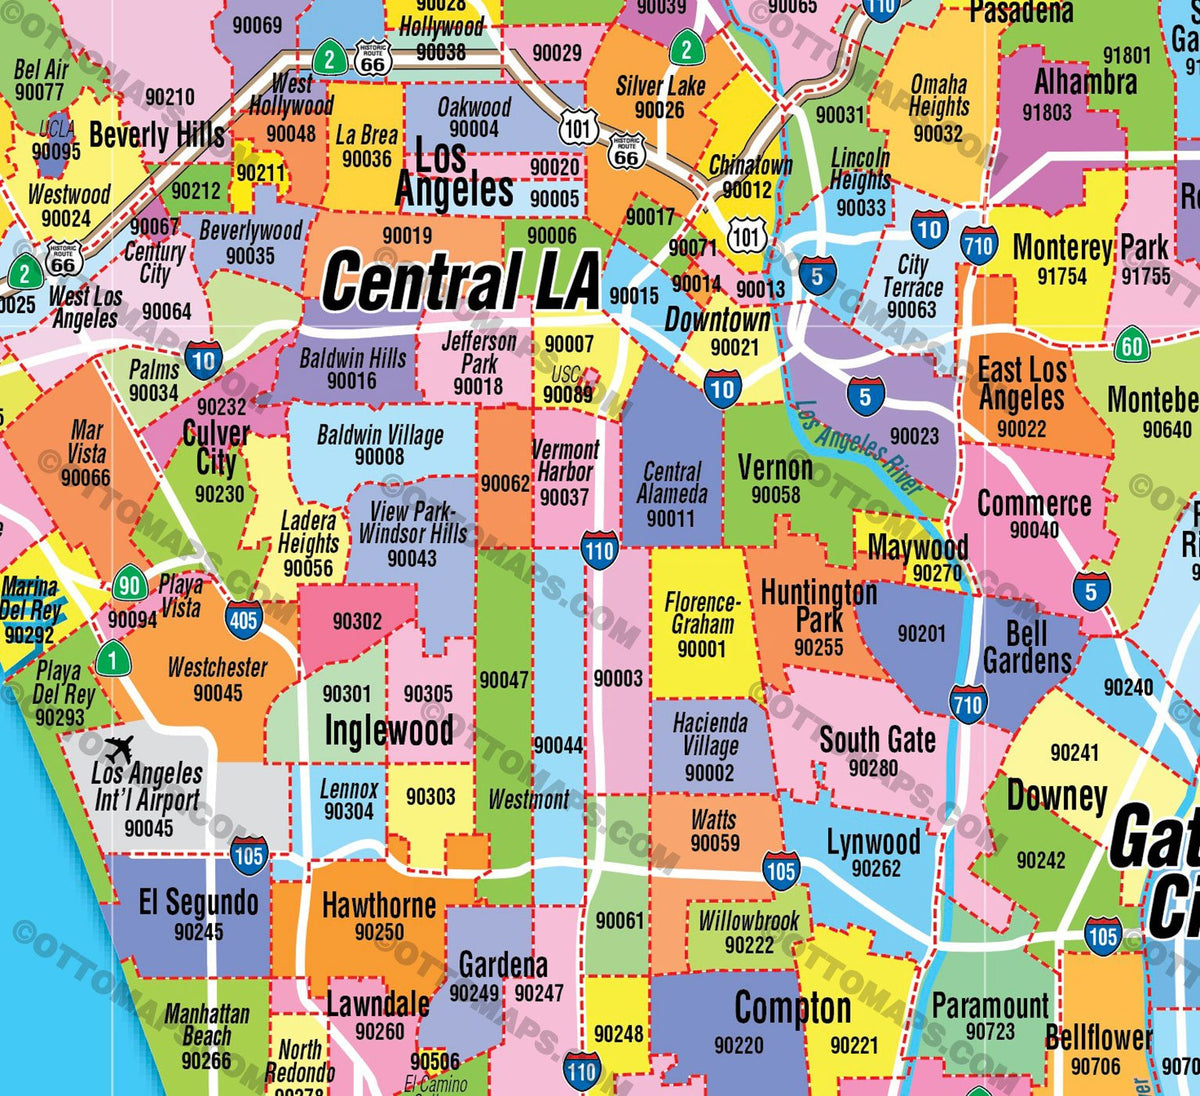 los-angeles-zip-code-map-full-zip-codes-colorized-otto-maps